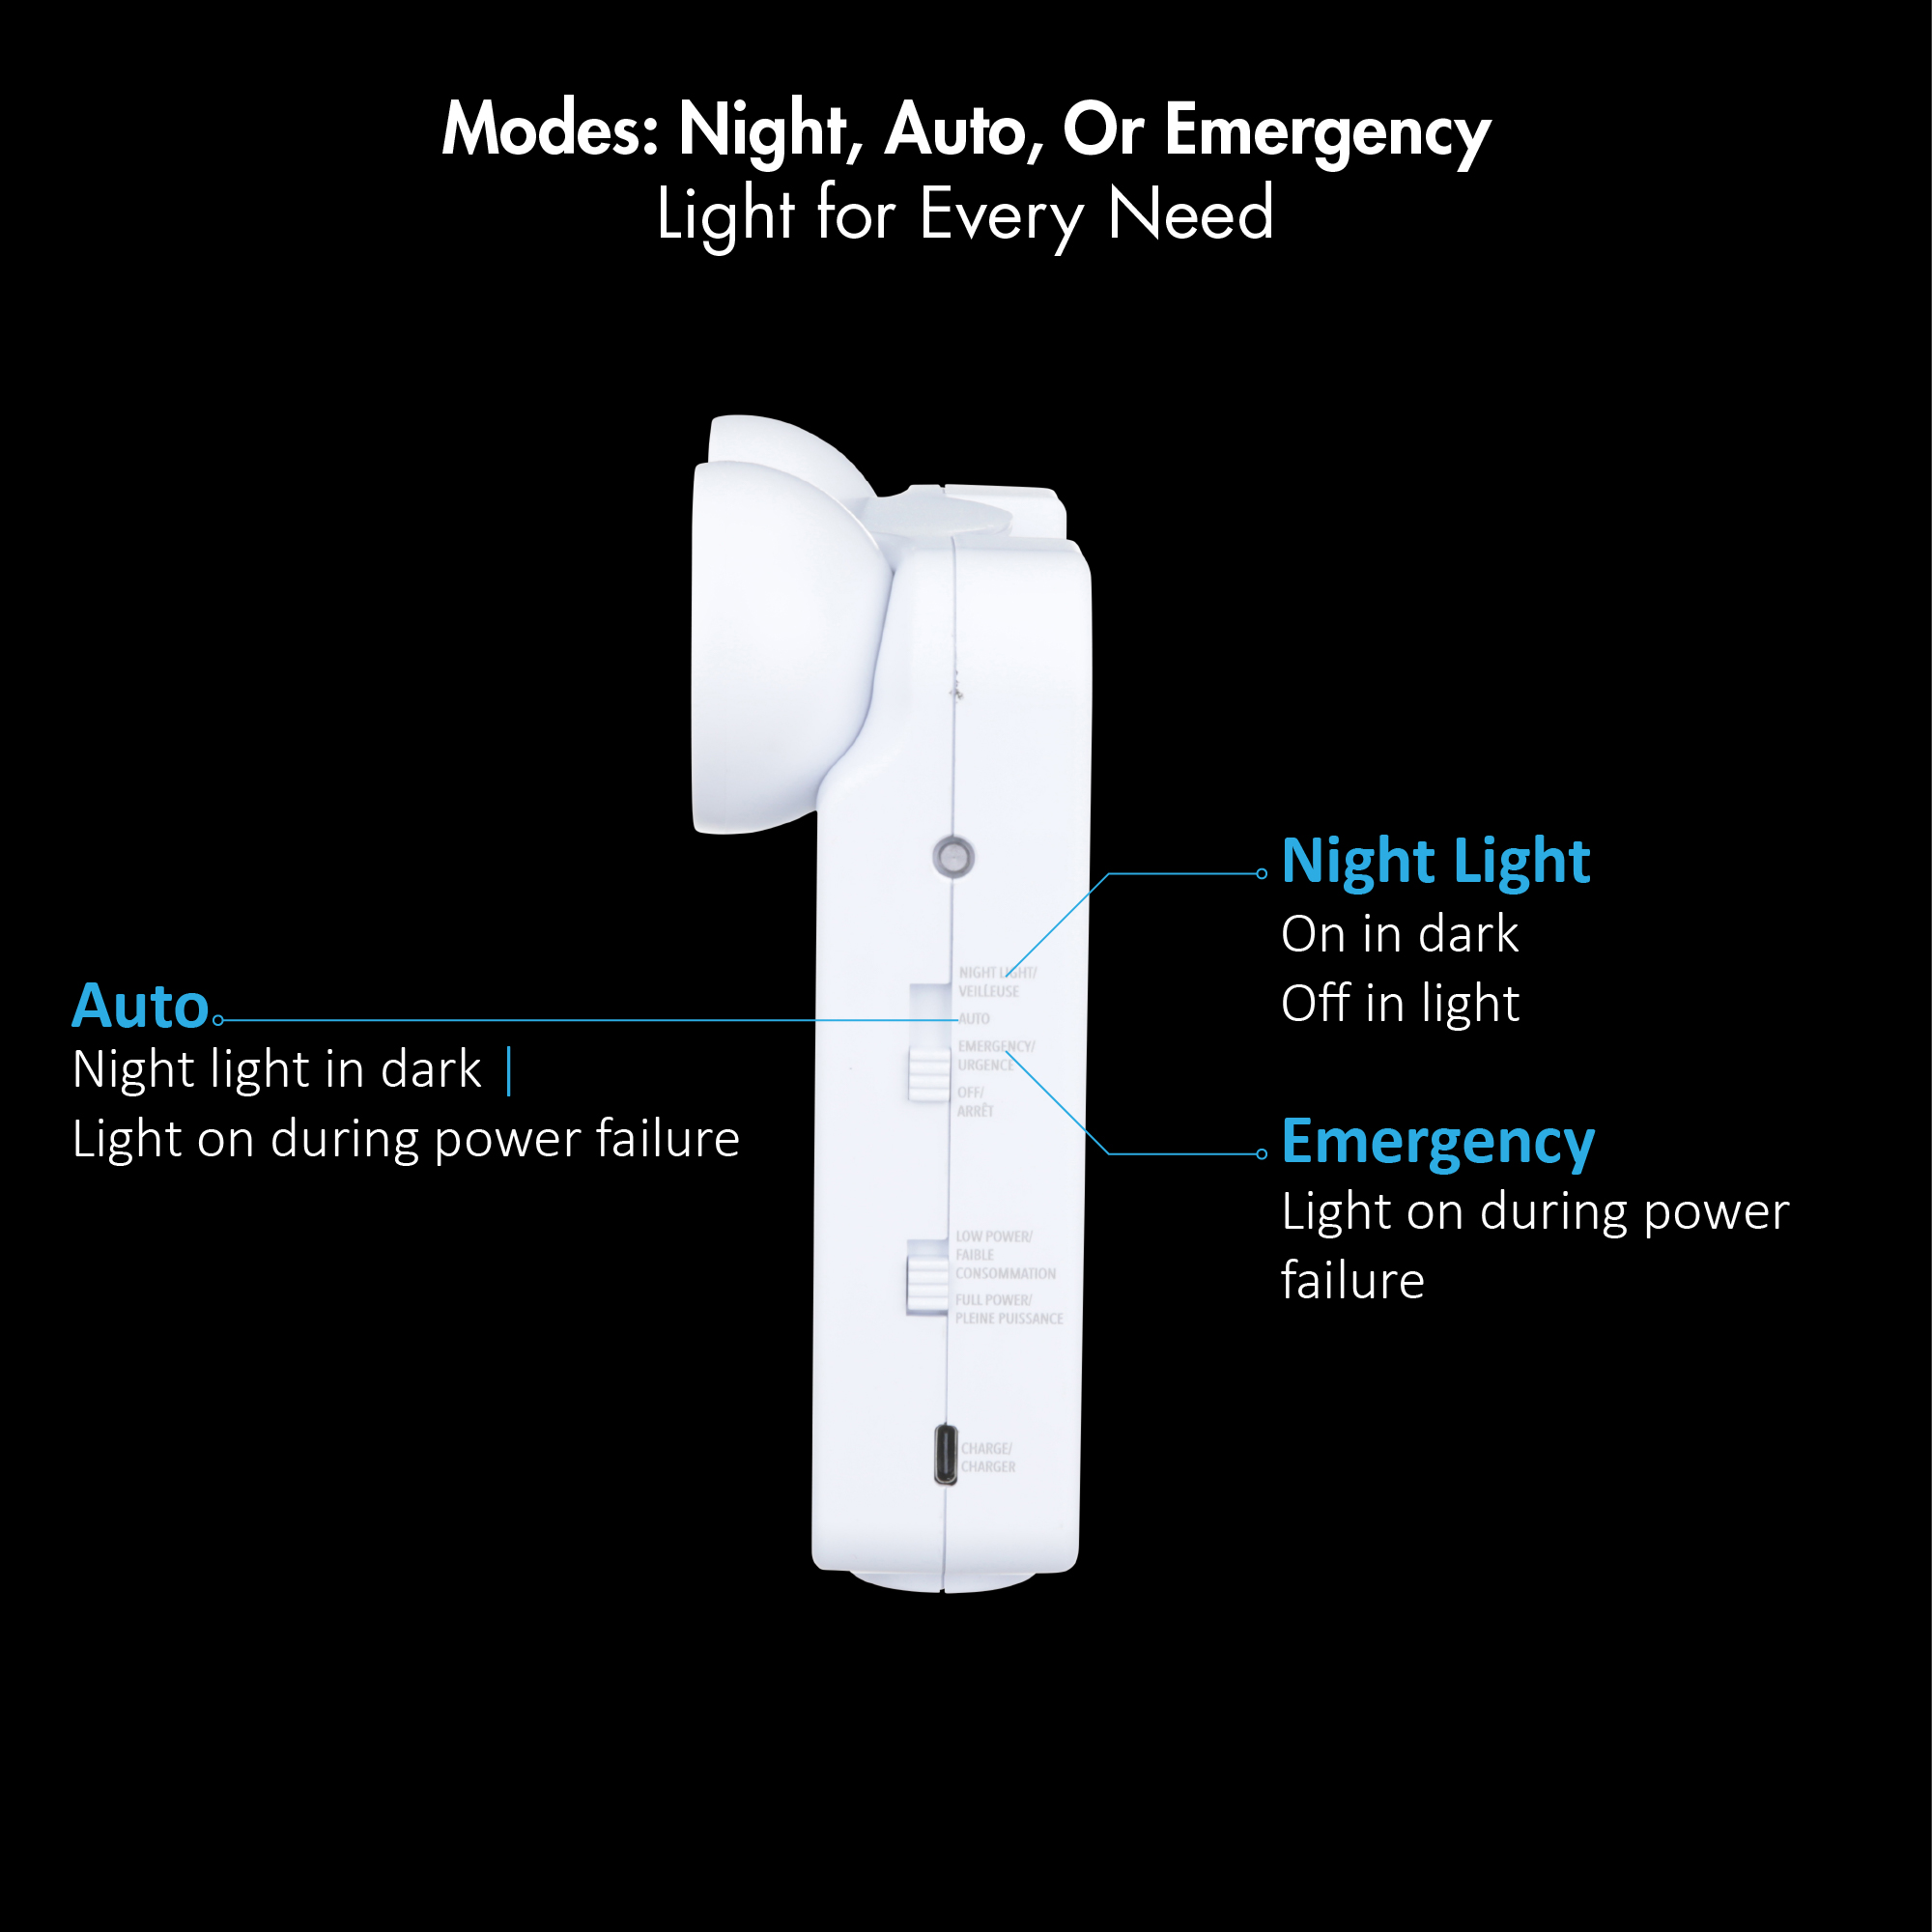 Ideal Security Rechargeable Battery Powered LED Emergency Light, 140 Lumens